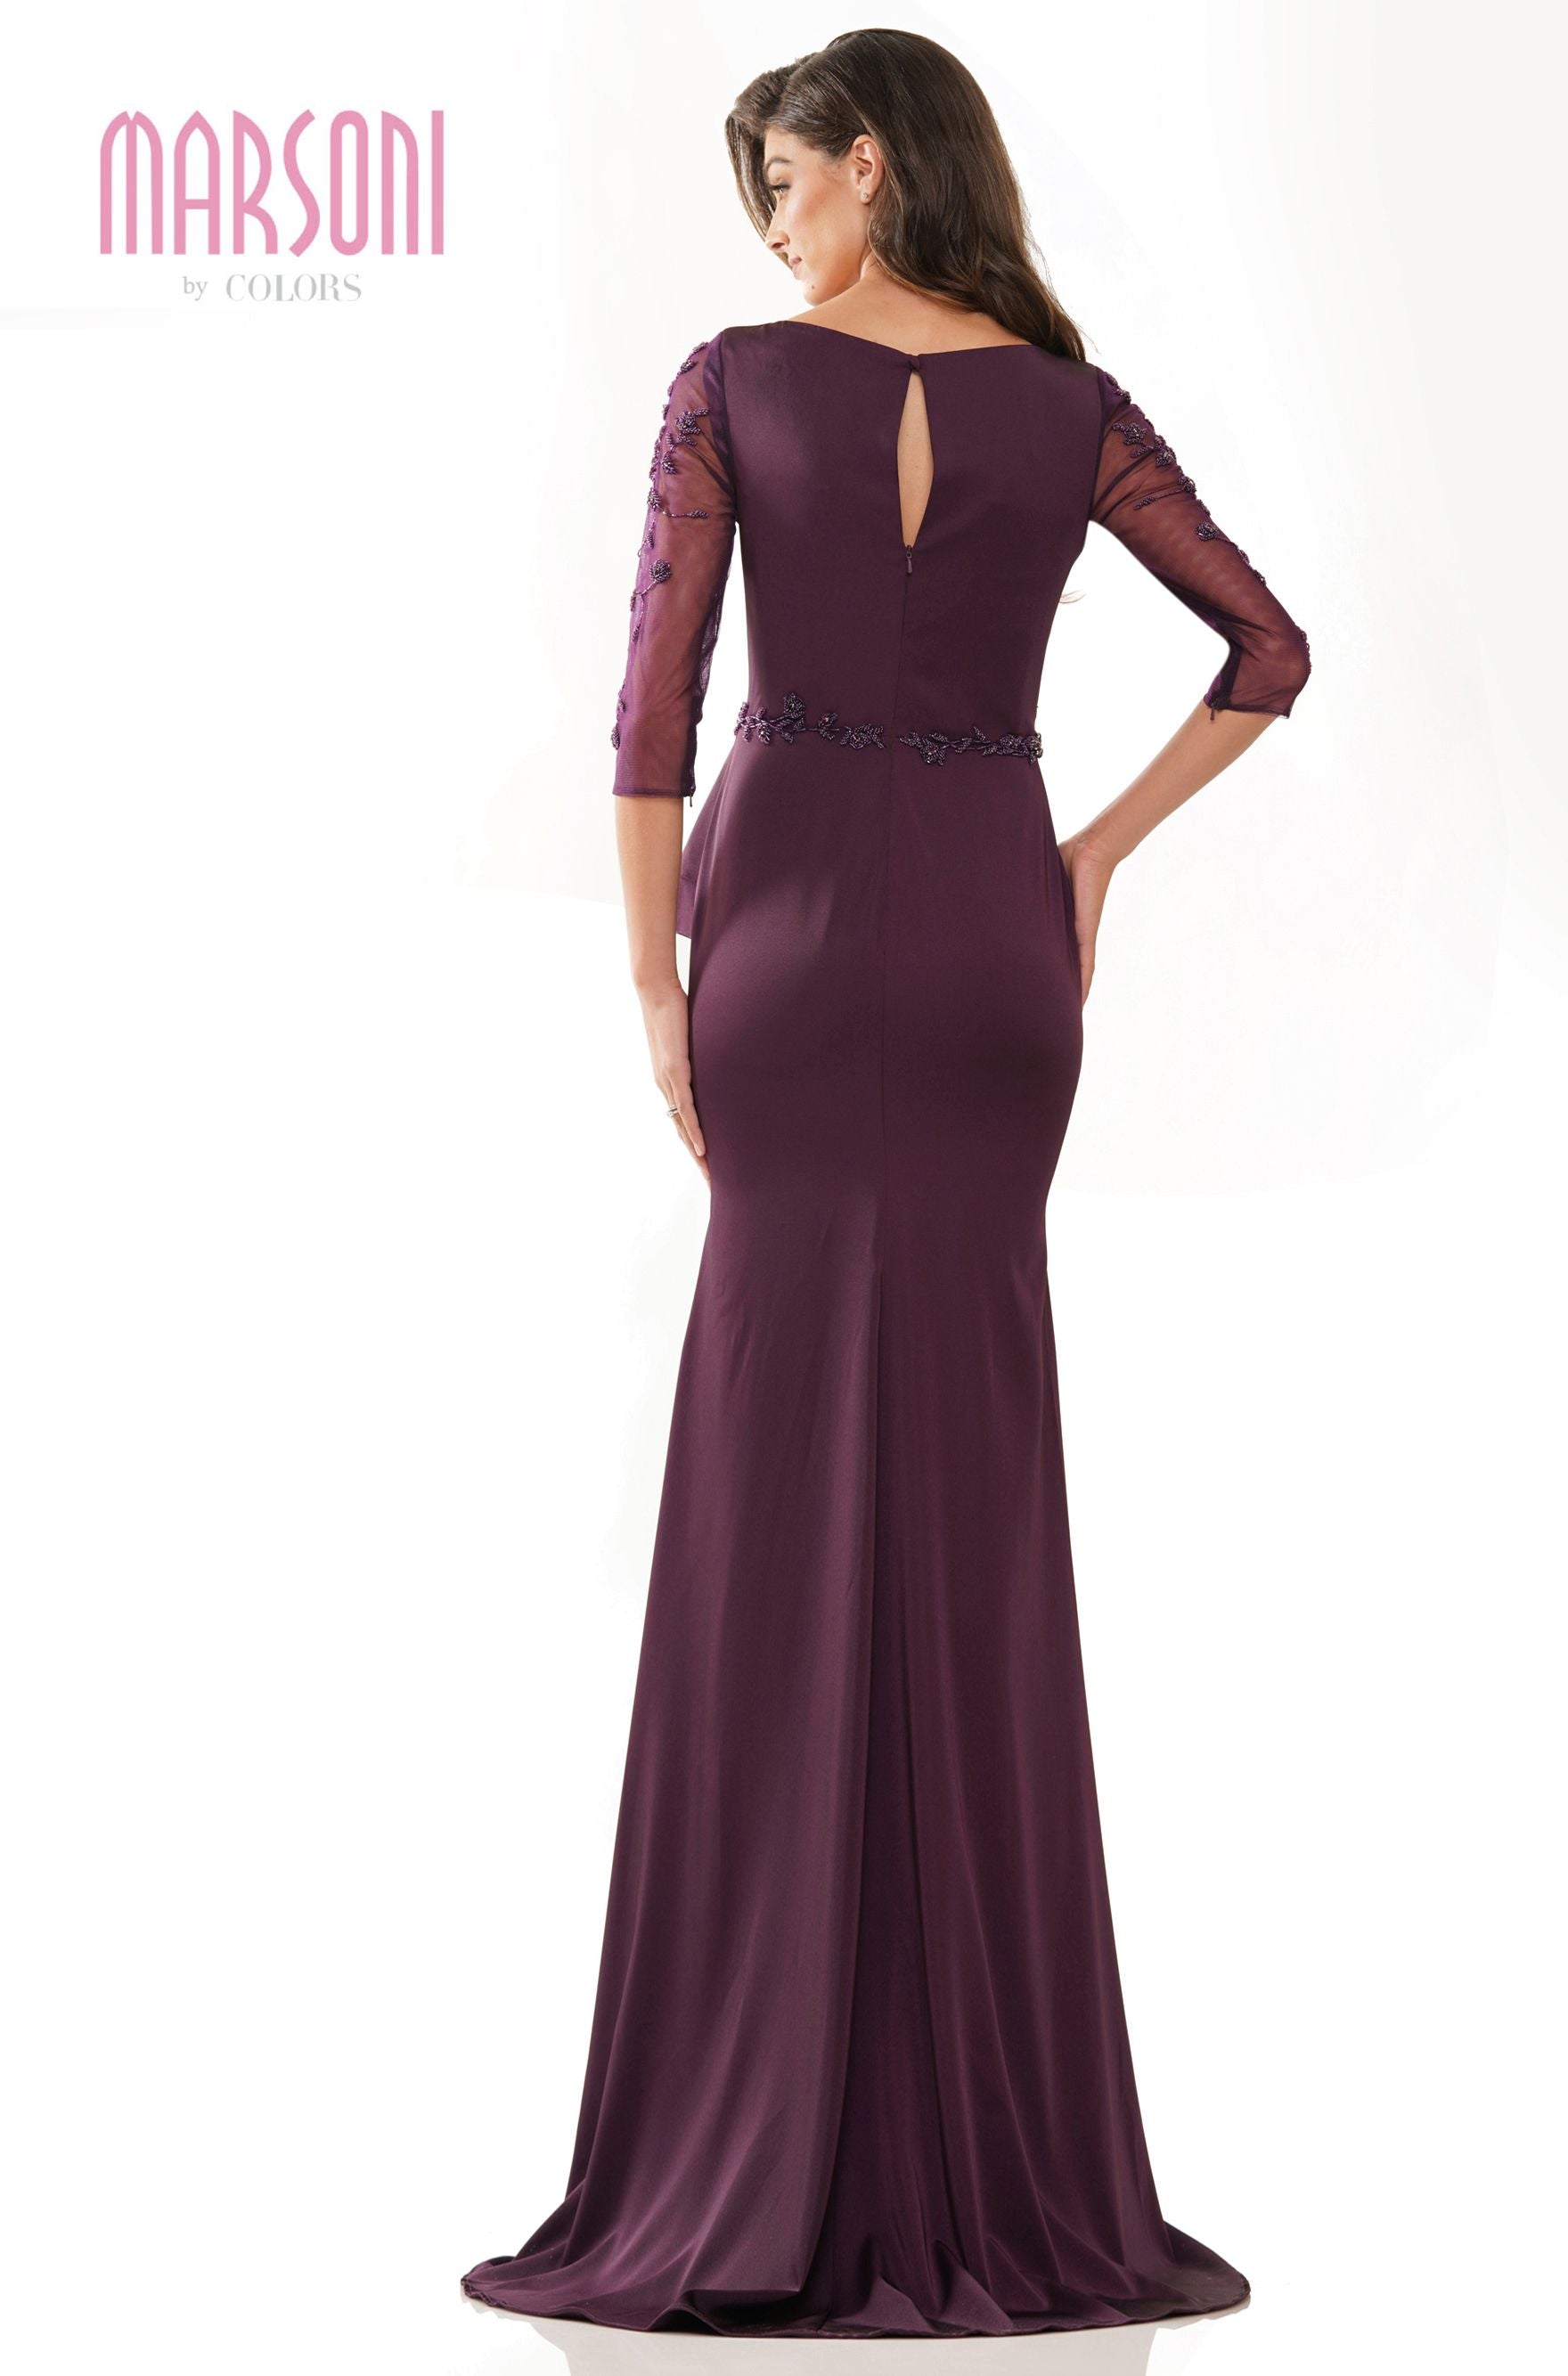 Marsoni by Colors -MV1231 Fit and Flare Dress With Beaded On Sleeves